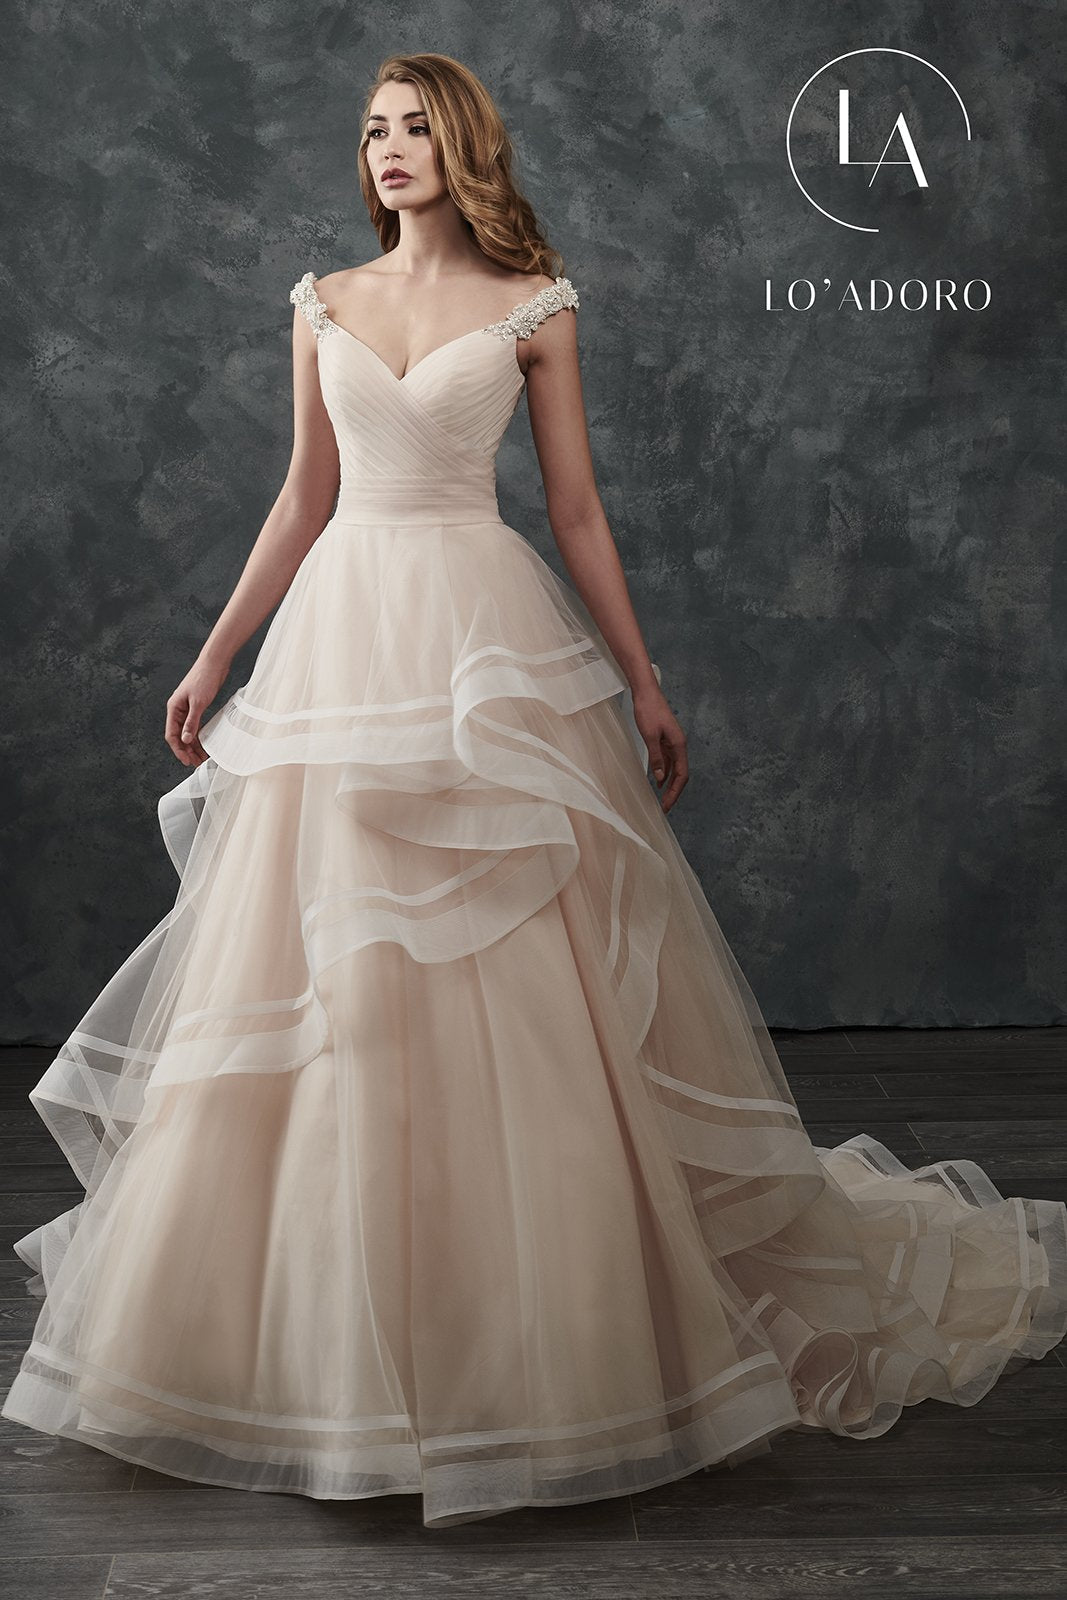 He Shoulder Ball Gowns Lo' Adoro Bridal In Ivory Color Rachel Allan